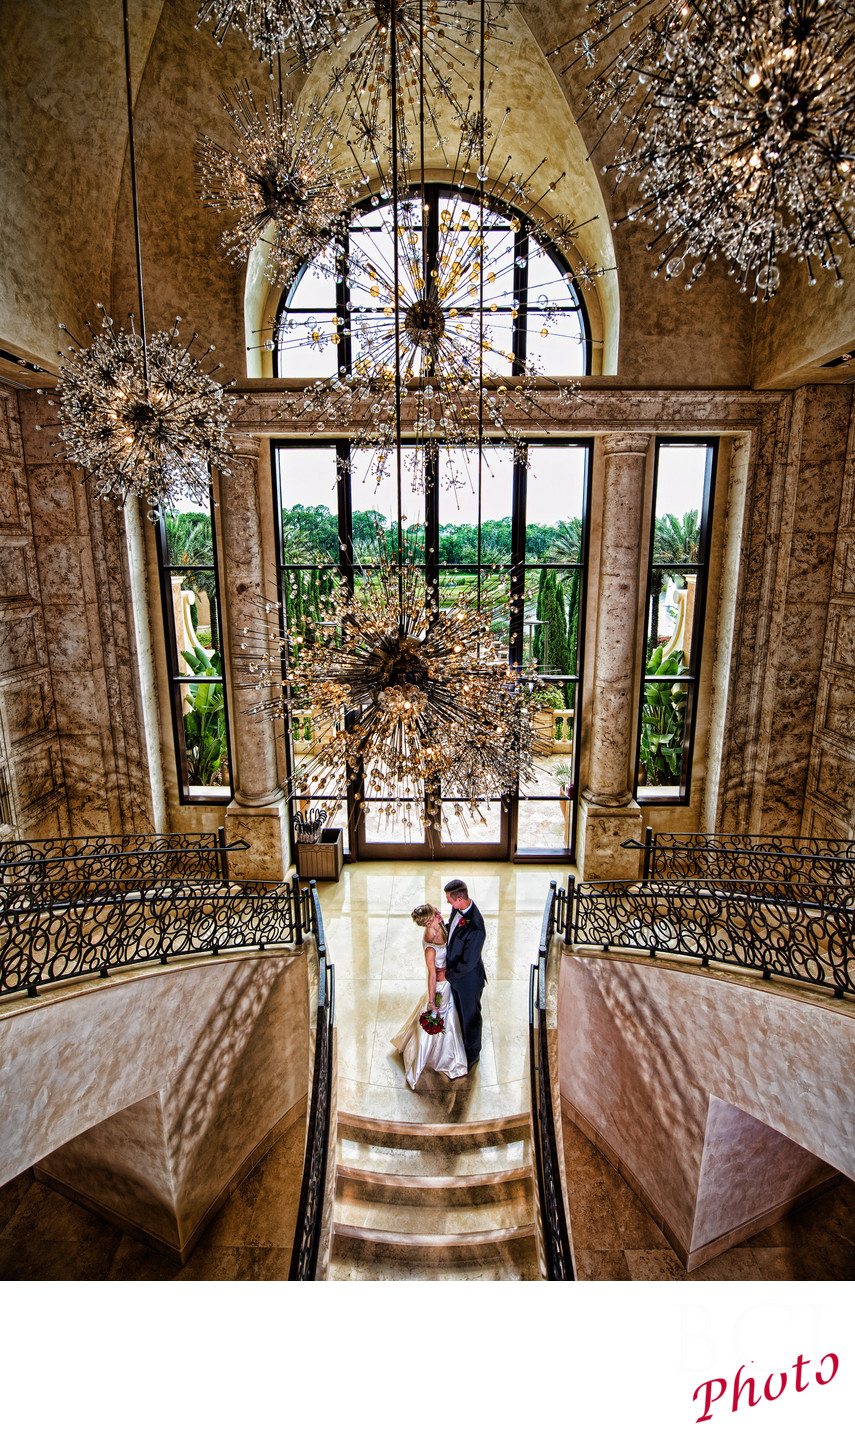 Romantic wedding images from the Four Seasons Disney